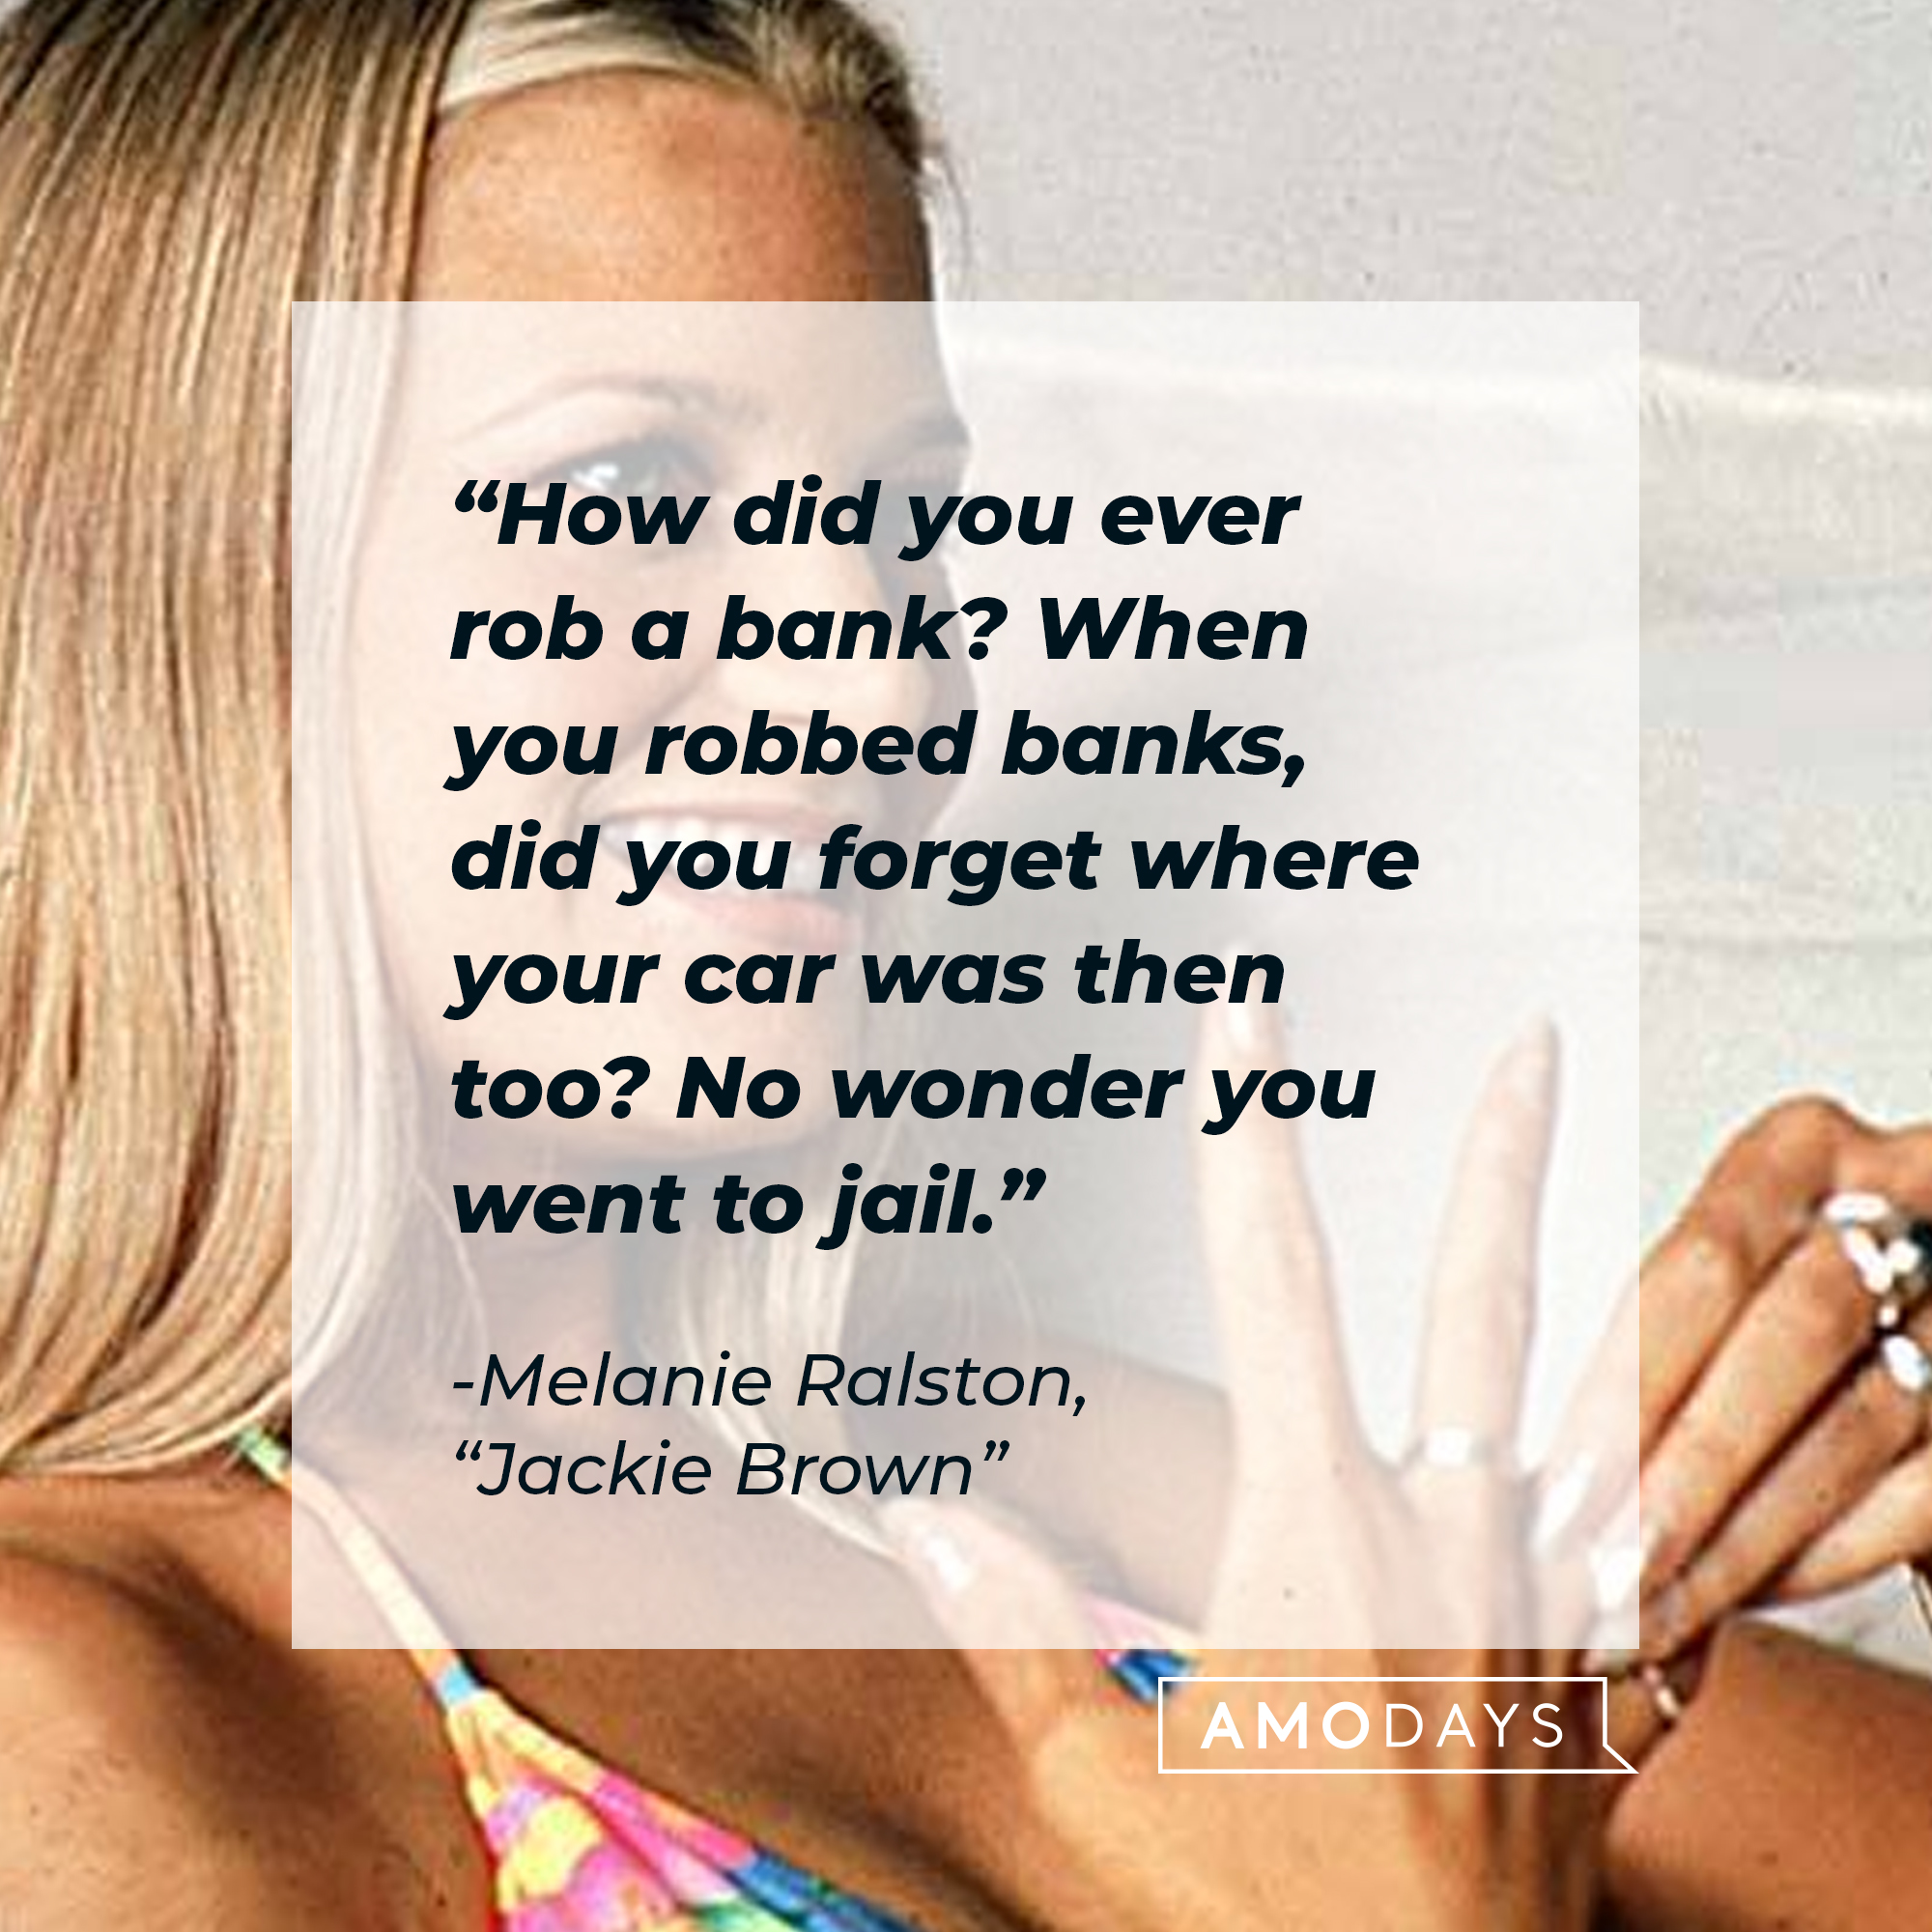 Melanie Ralston's quote: "How did you ever rob a bank? When you robbed banks, did you forget where your car was then too? No wonder you went to jail." | Source: Facebook/JackieBrownMovie